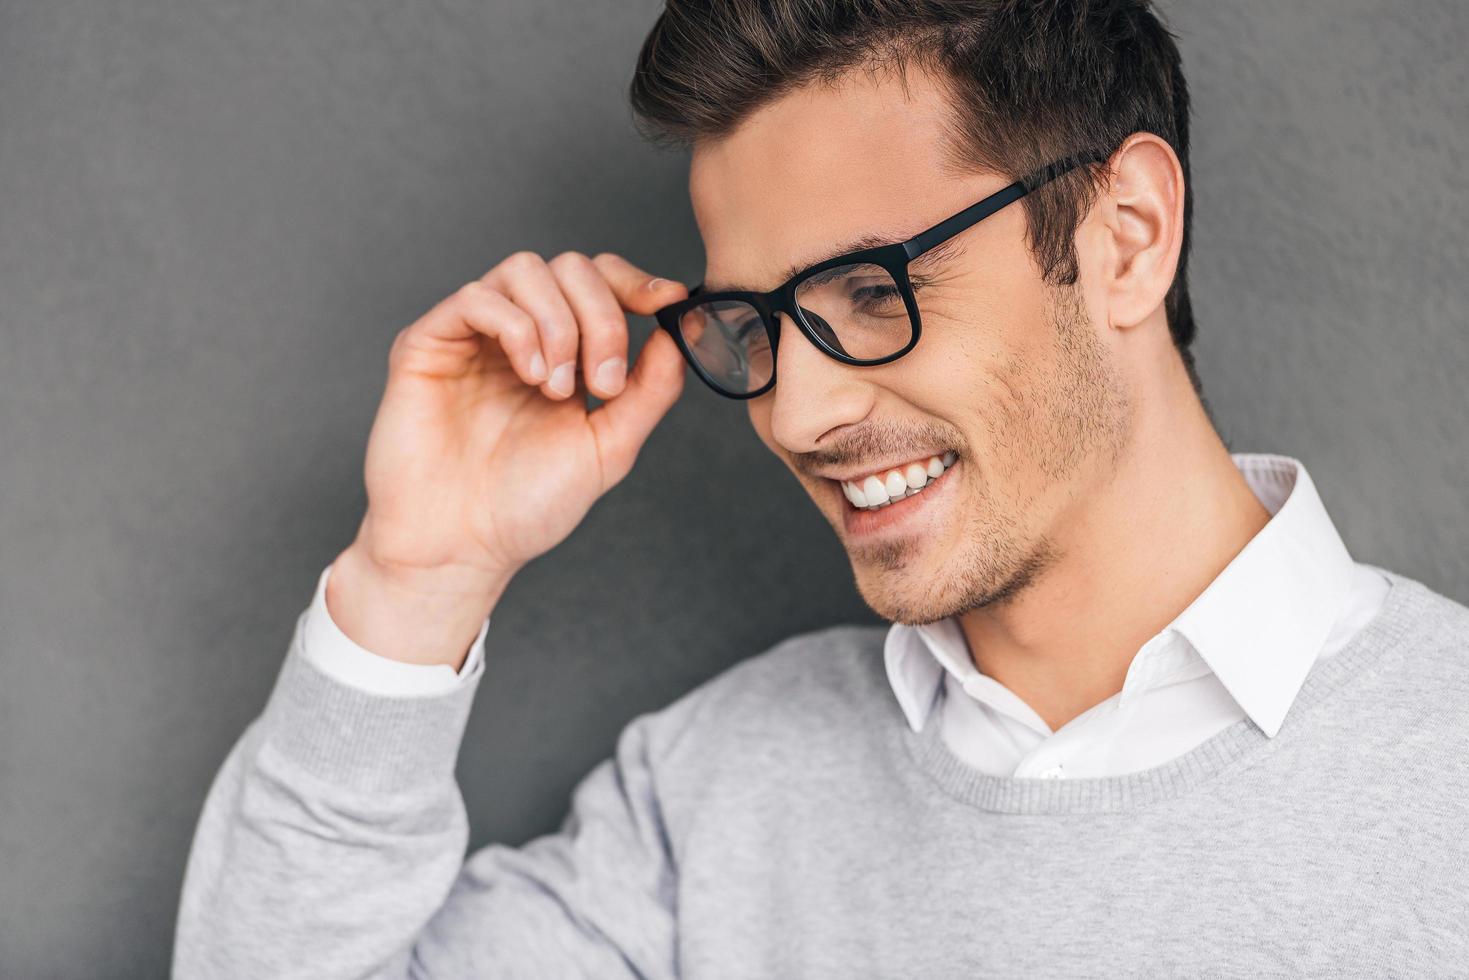 Elegance and success. Side view of confident young man adjusting his glasses and looking away with smile while standing against grey background photo